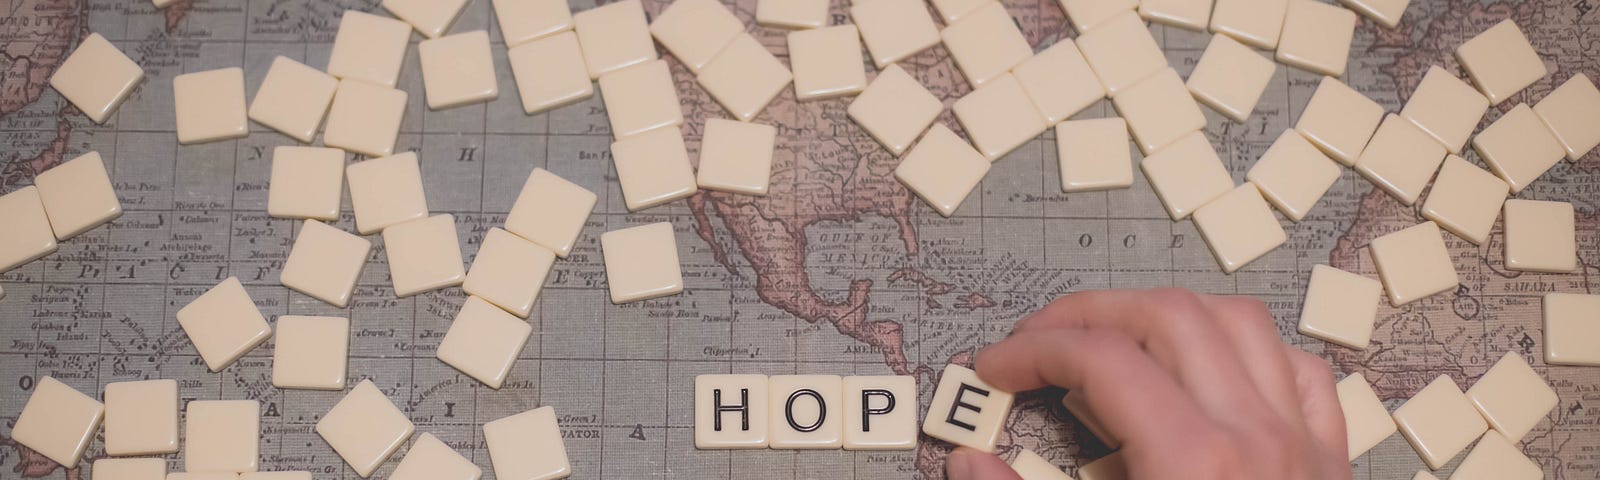 the word hope made of pieces of scrabble tiles